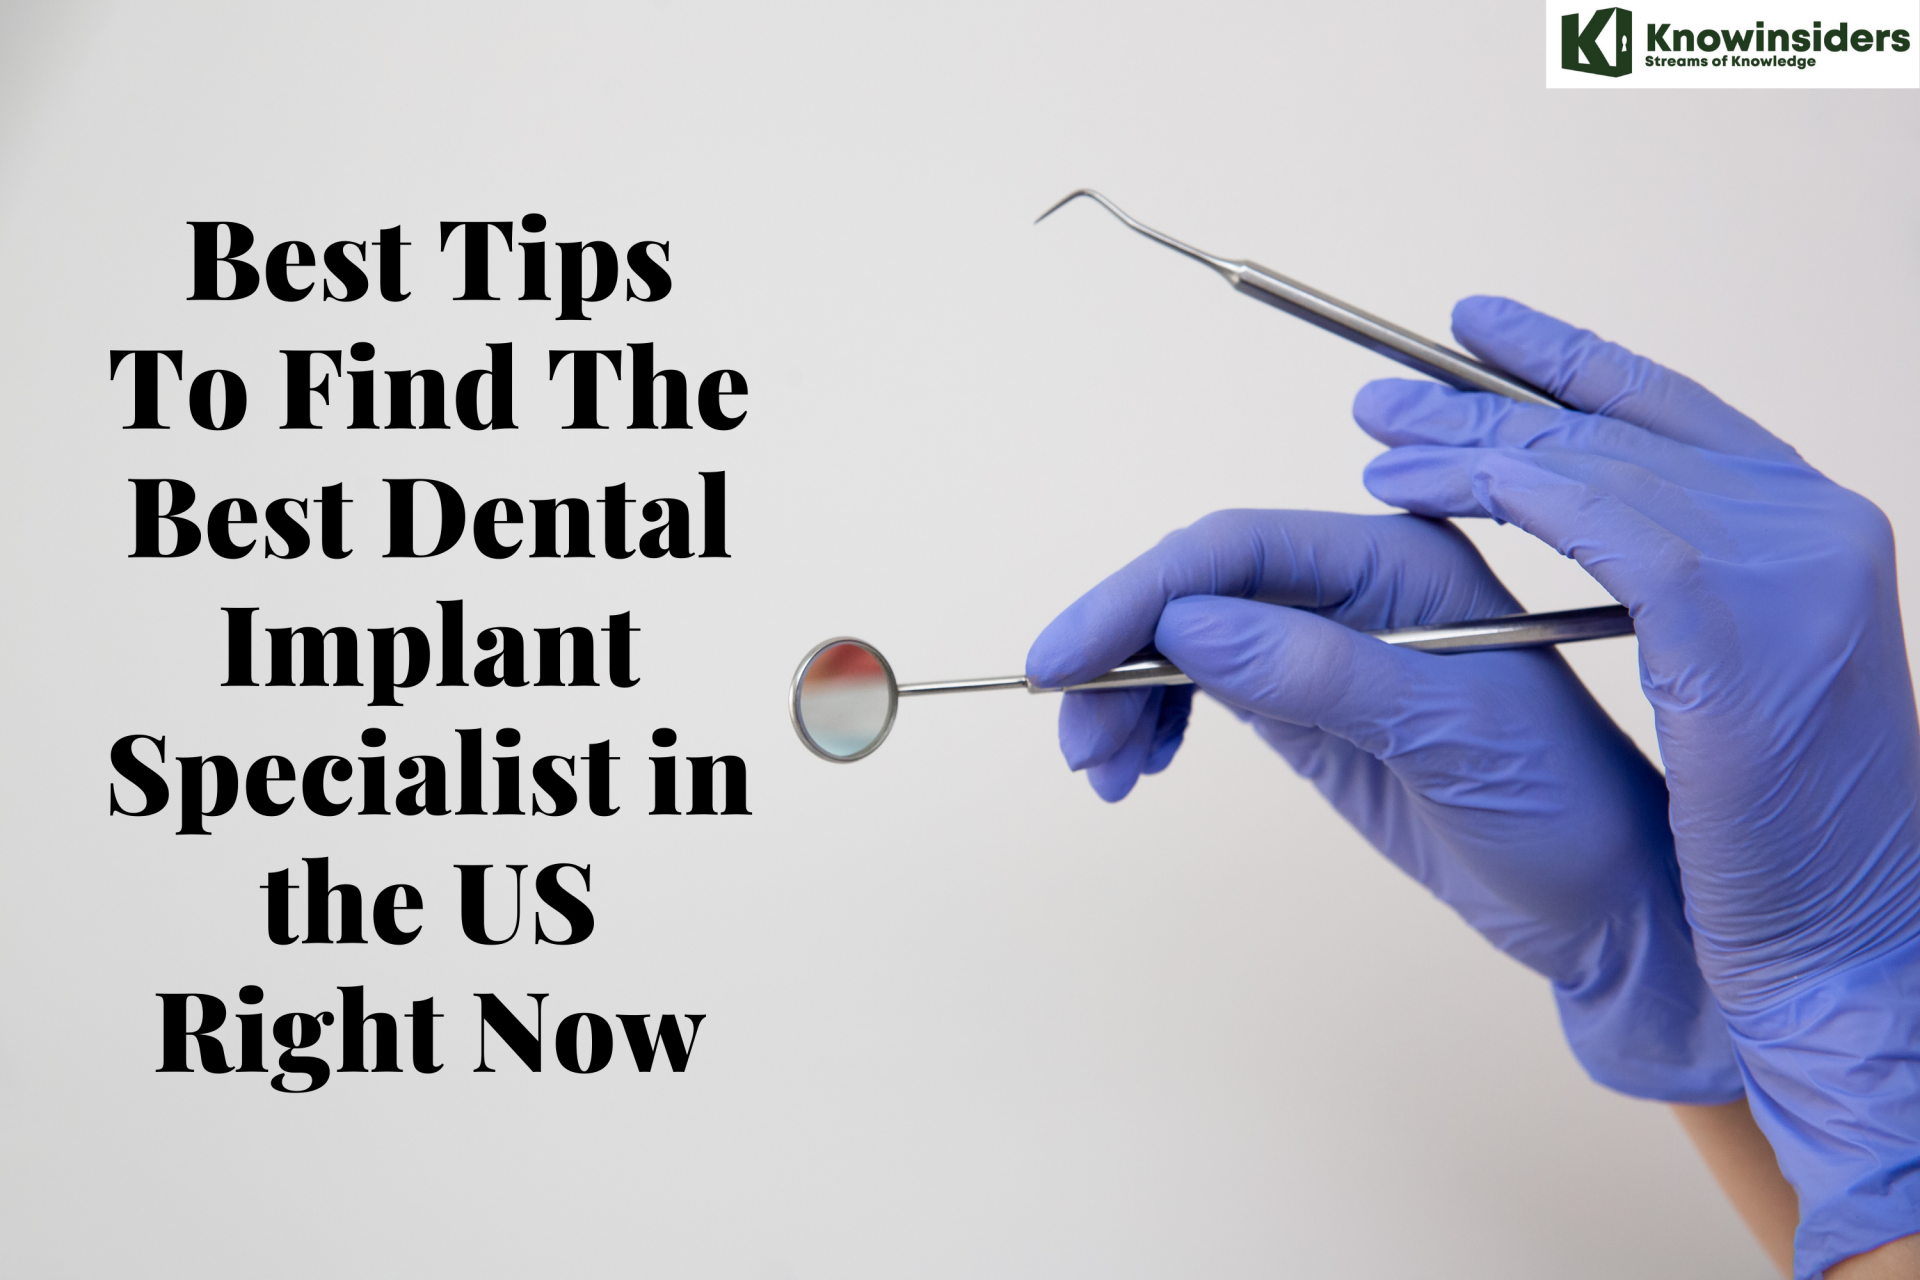 Best Tips To Find The Best Dental Implant Specialist in the US Right Now